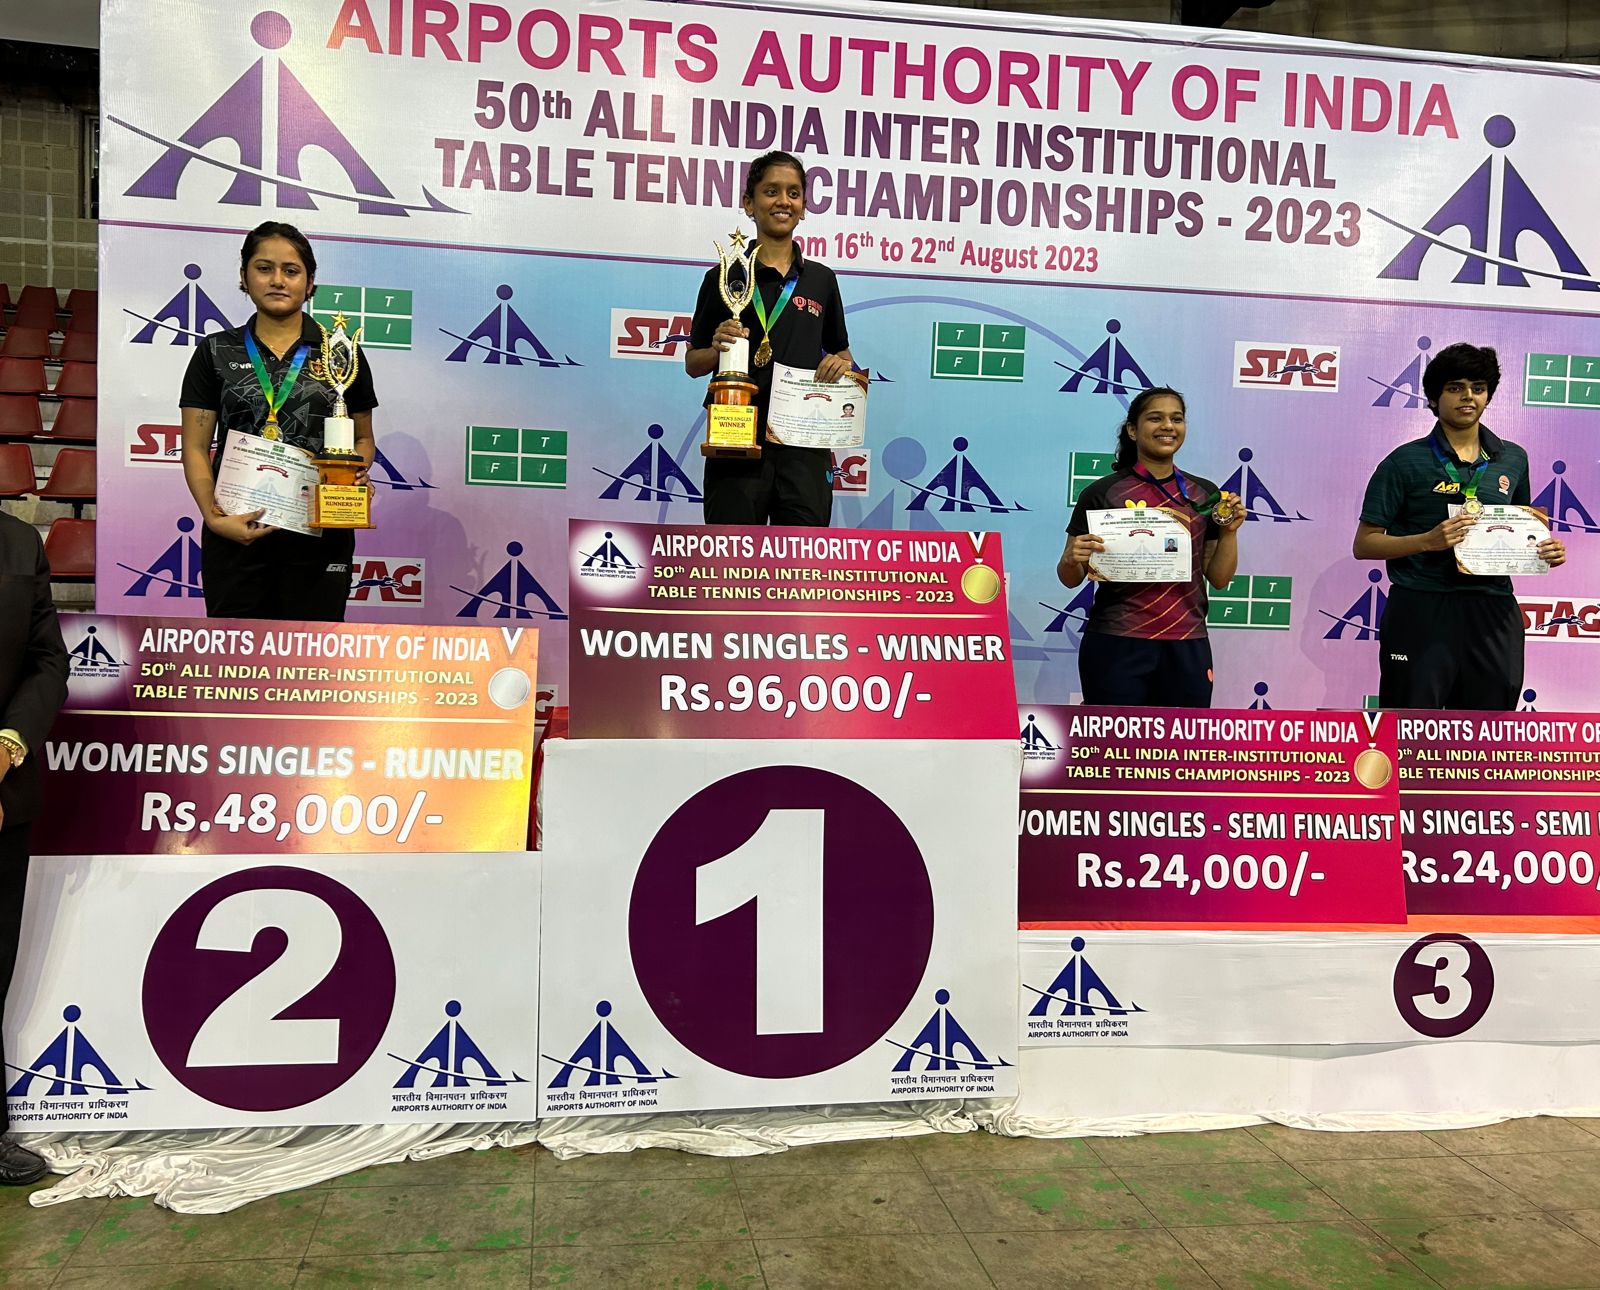 Ms. Moumita Dutta, representing Railway Sports Promotion Board (RSPB) has secured the 2nd position in the individual category. She won the silver medal in the 50th All India Inter Institutional Table Tennis Championship, 2023 held at Visakhapatnam, Andhra Pradesh from 16th to 22nd August 2023.